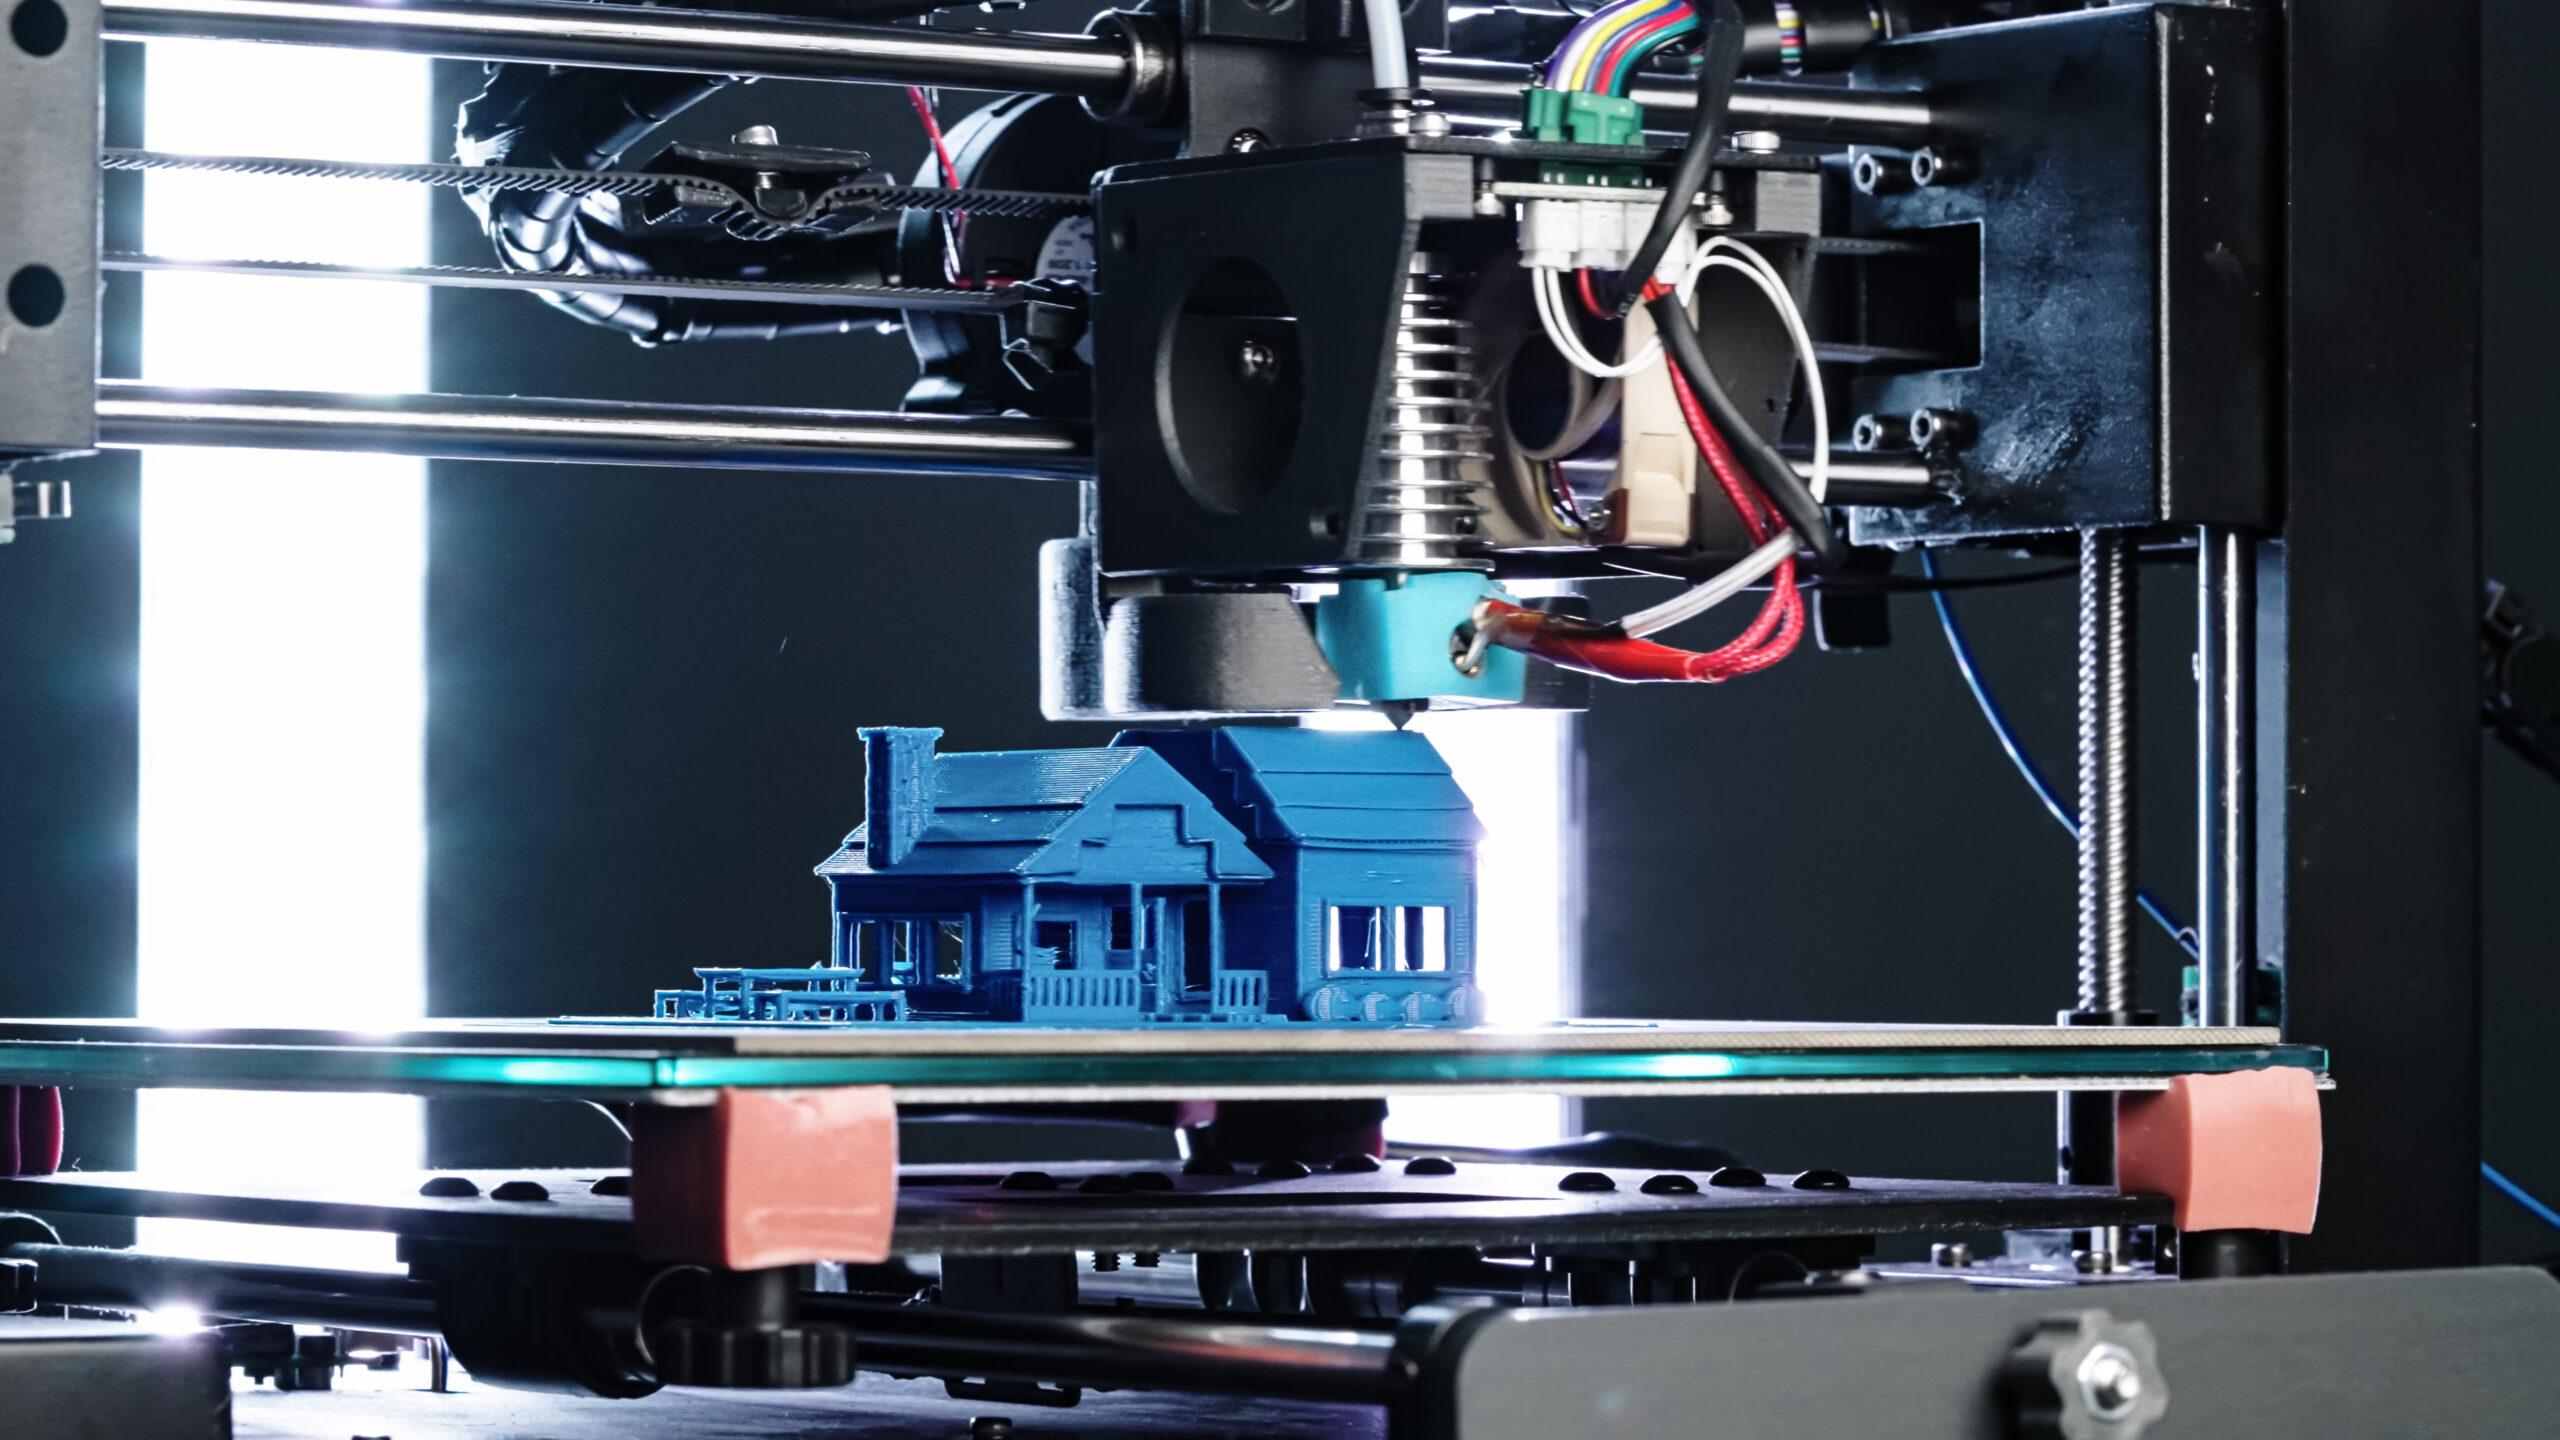 Construction 2.0: 3D-printing and other cutting-edge technologies hail the future of the construction industry